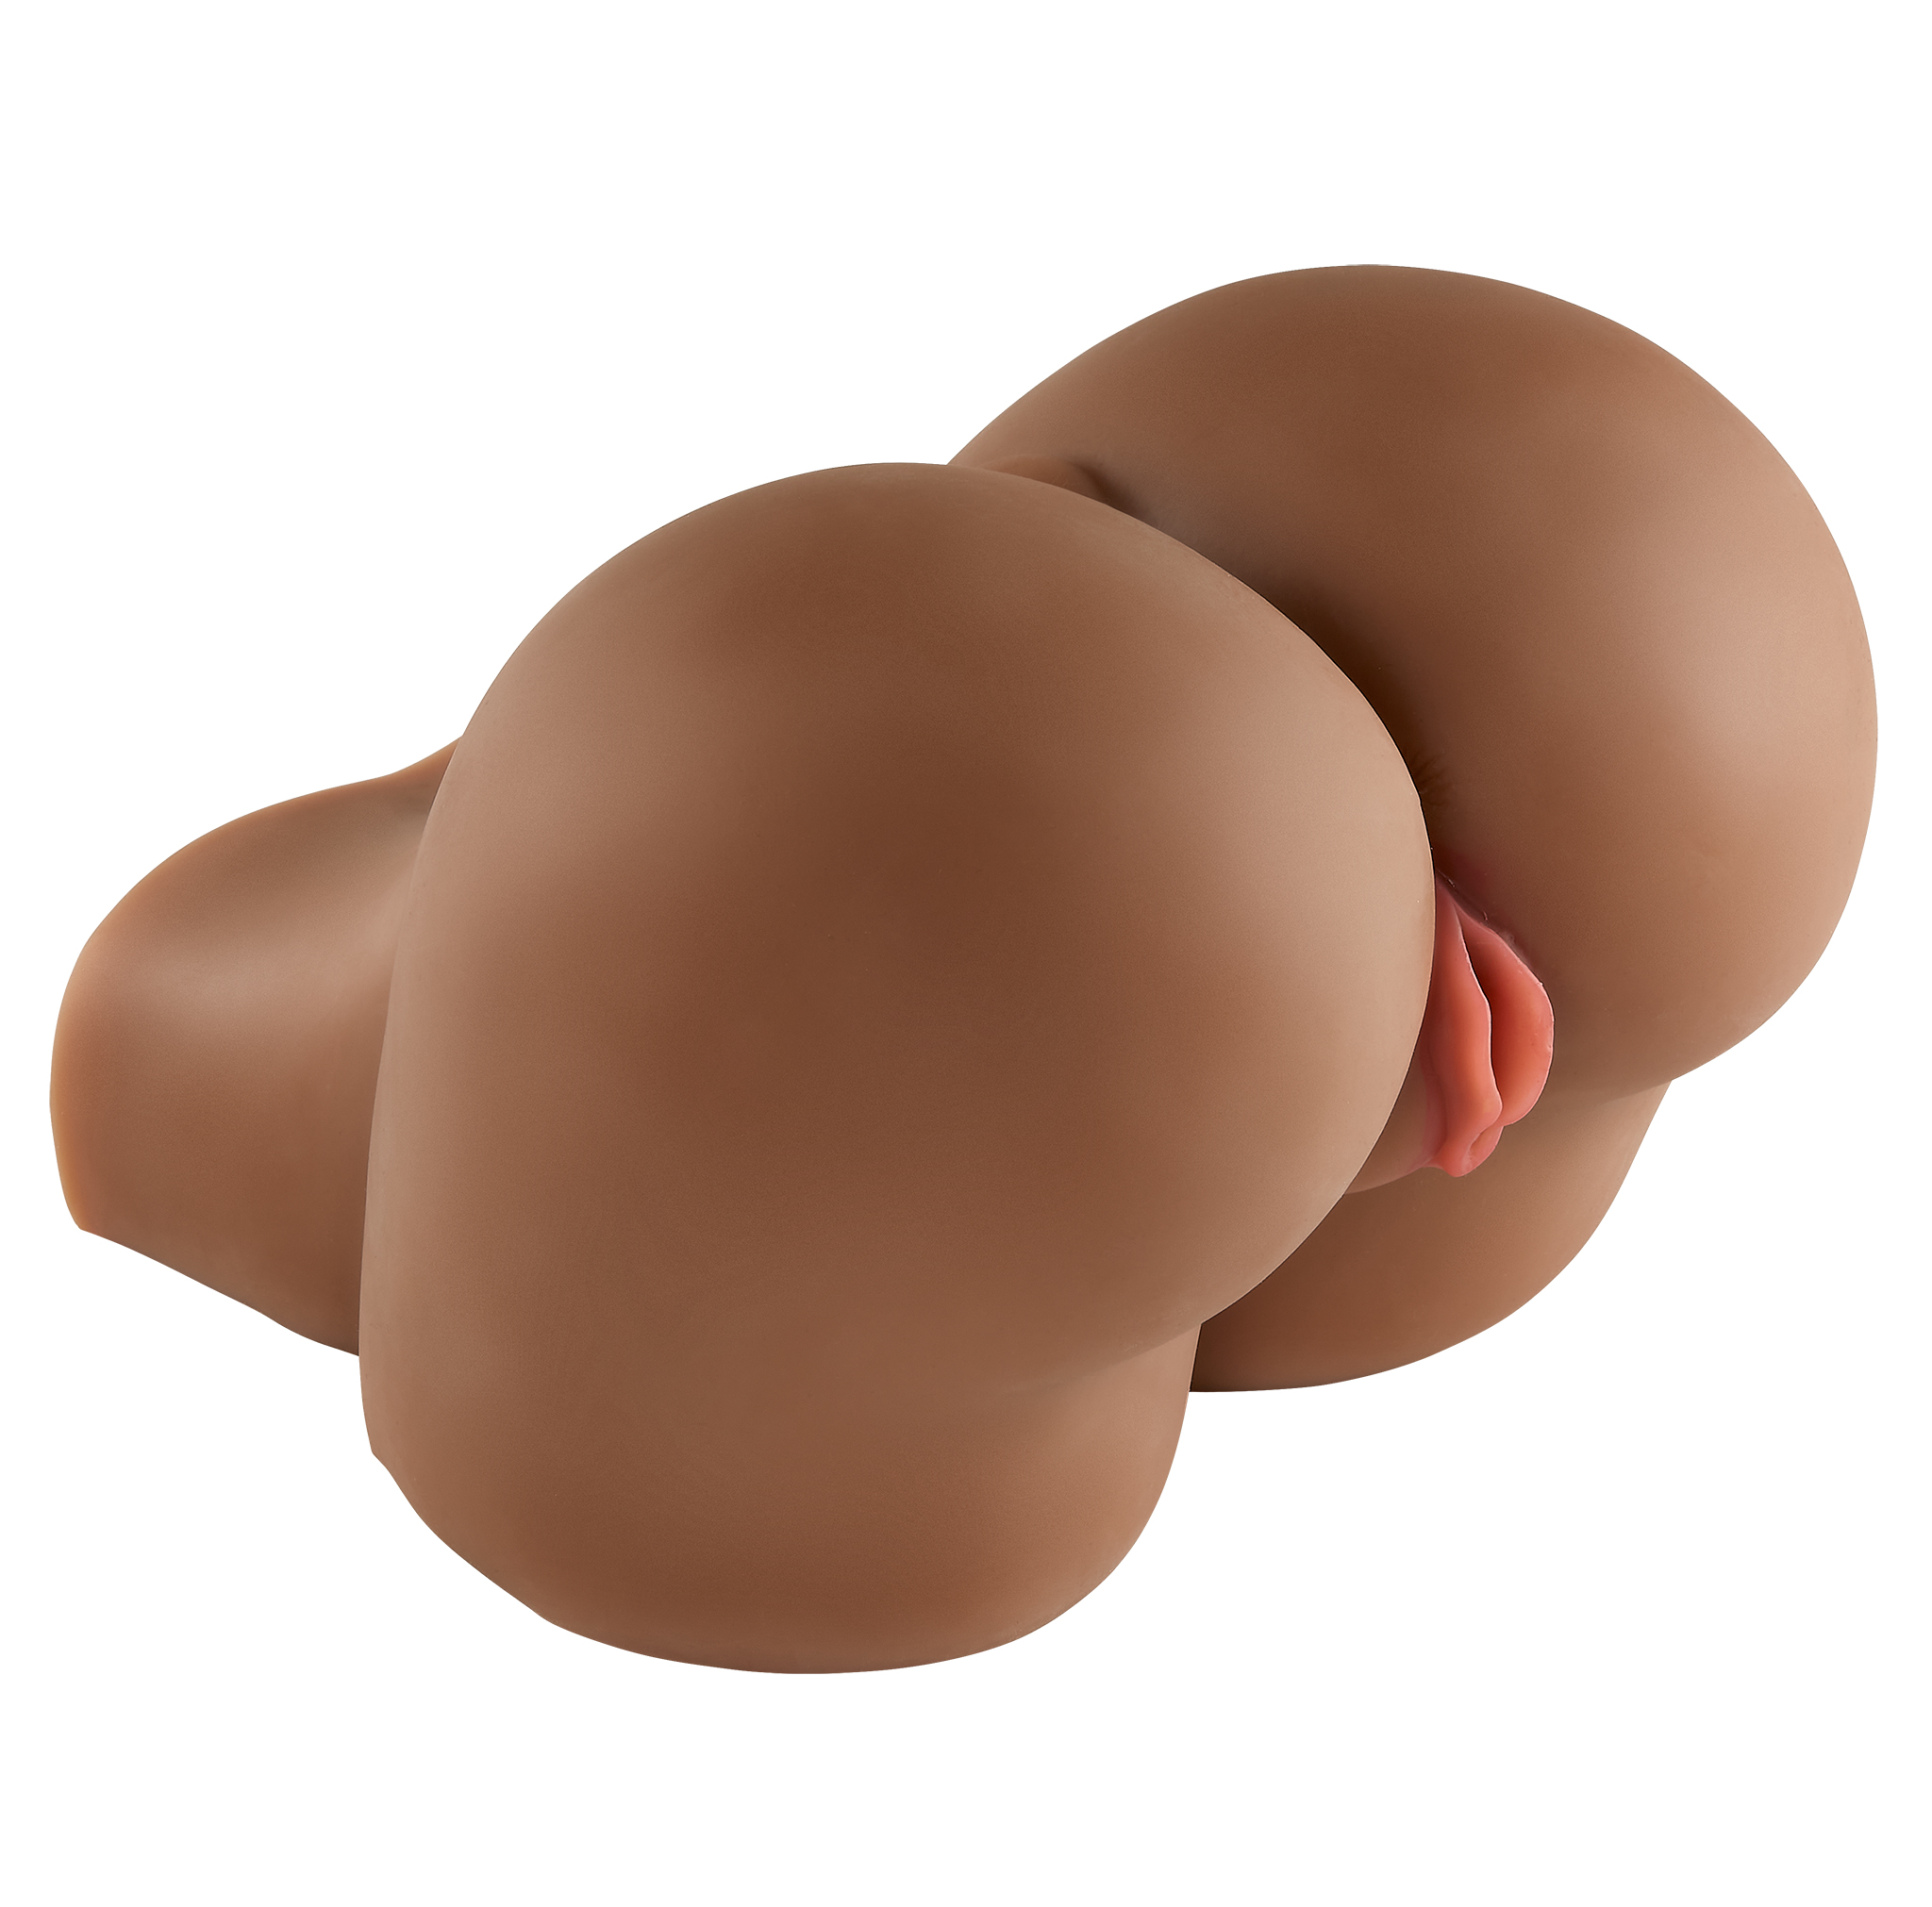 CLOUD 9 PLEASURE PUSSY & ASS LIFESIZE BODY MOLD - BROWN 